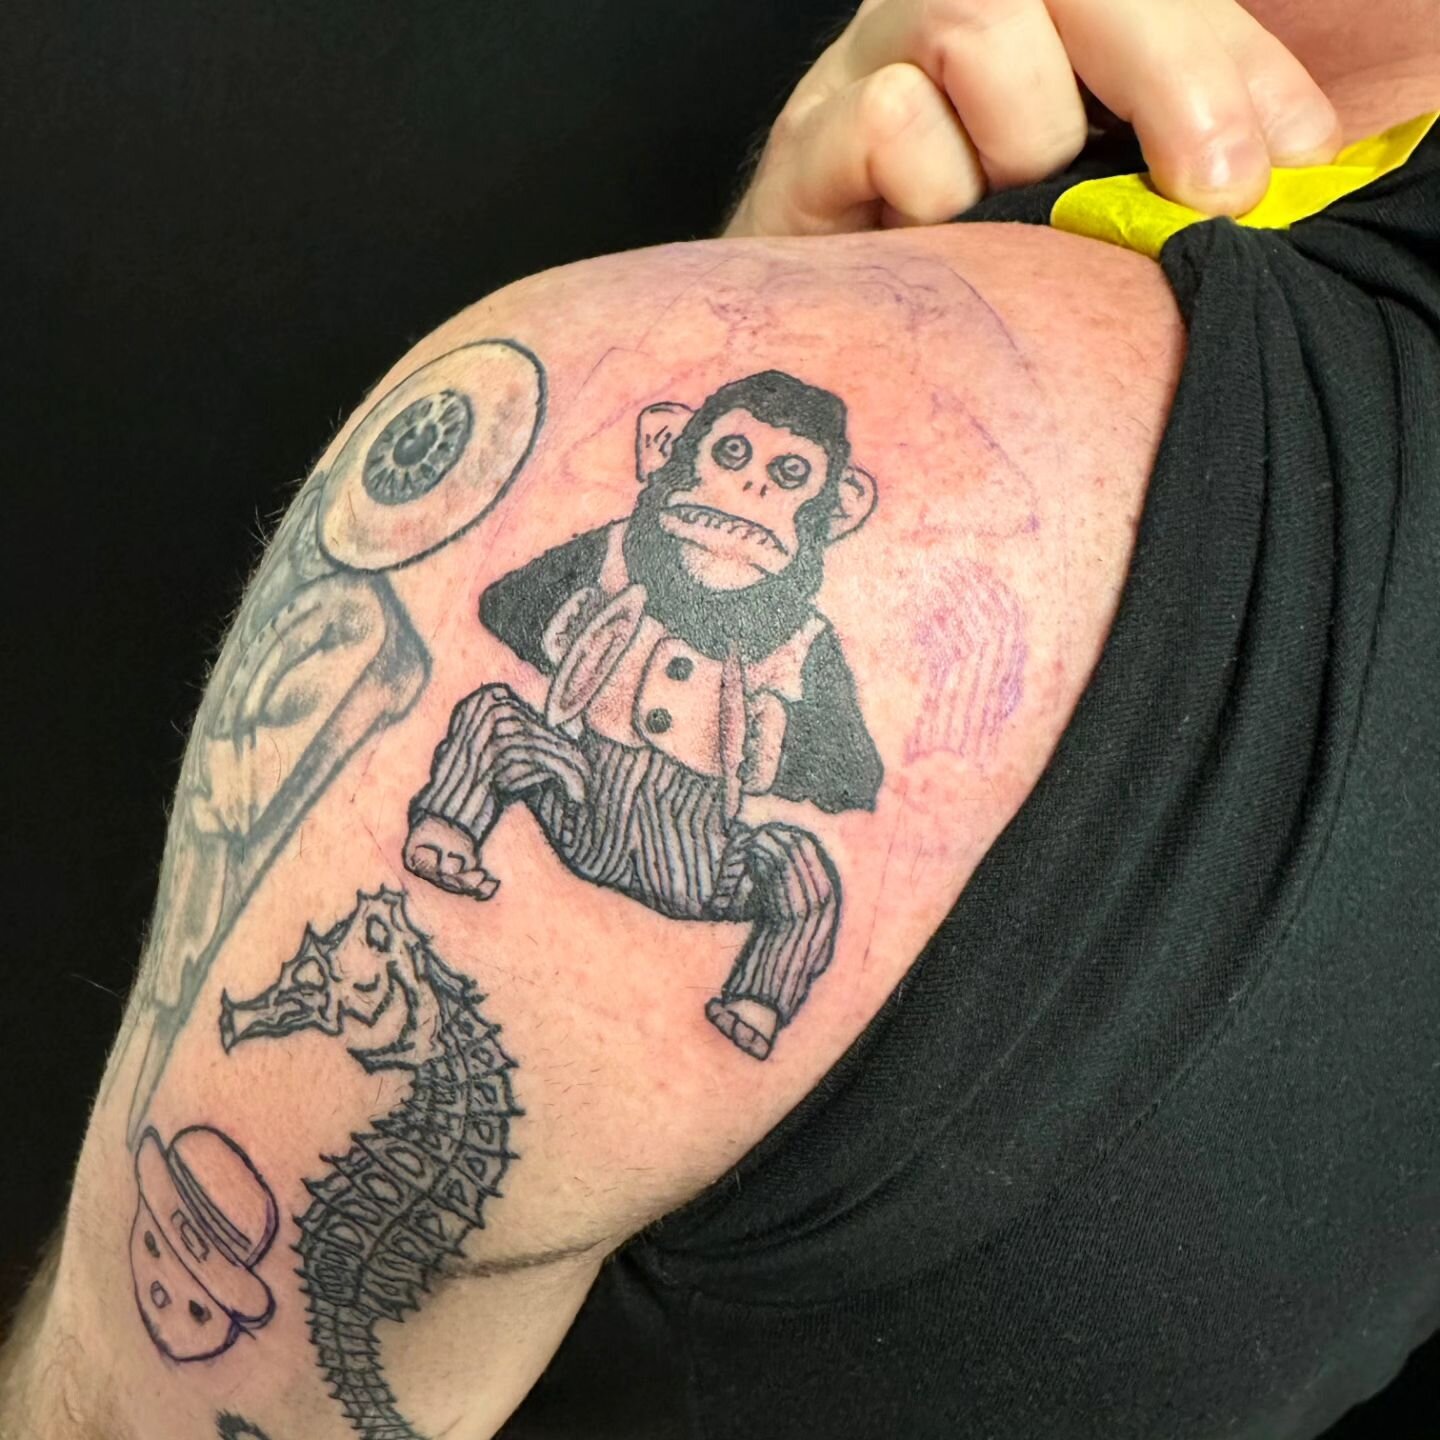 This little chimp guy playing the symbols seems to be staring me down HARD like I owe him money... I don't, by the way, I don't borrow from poor hard working apes. 😍
.
.
Follow @rogue_tattoopgh
.

.
.
.
.
.
.
.
.

#412 #tattooflash #pittsburghartist